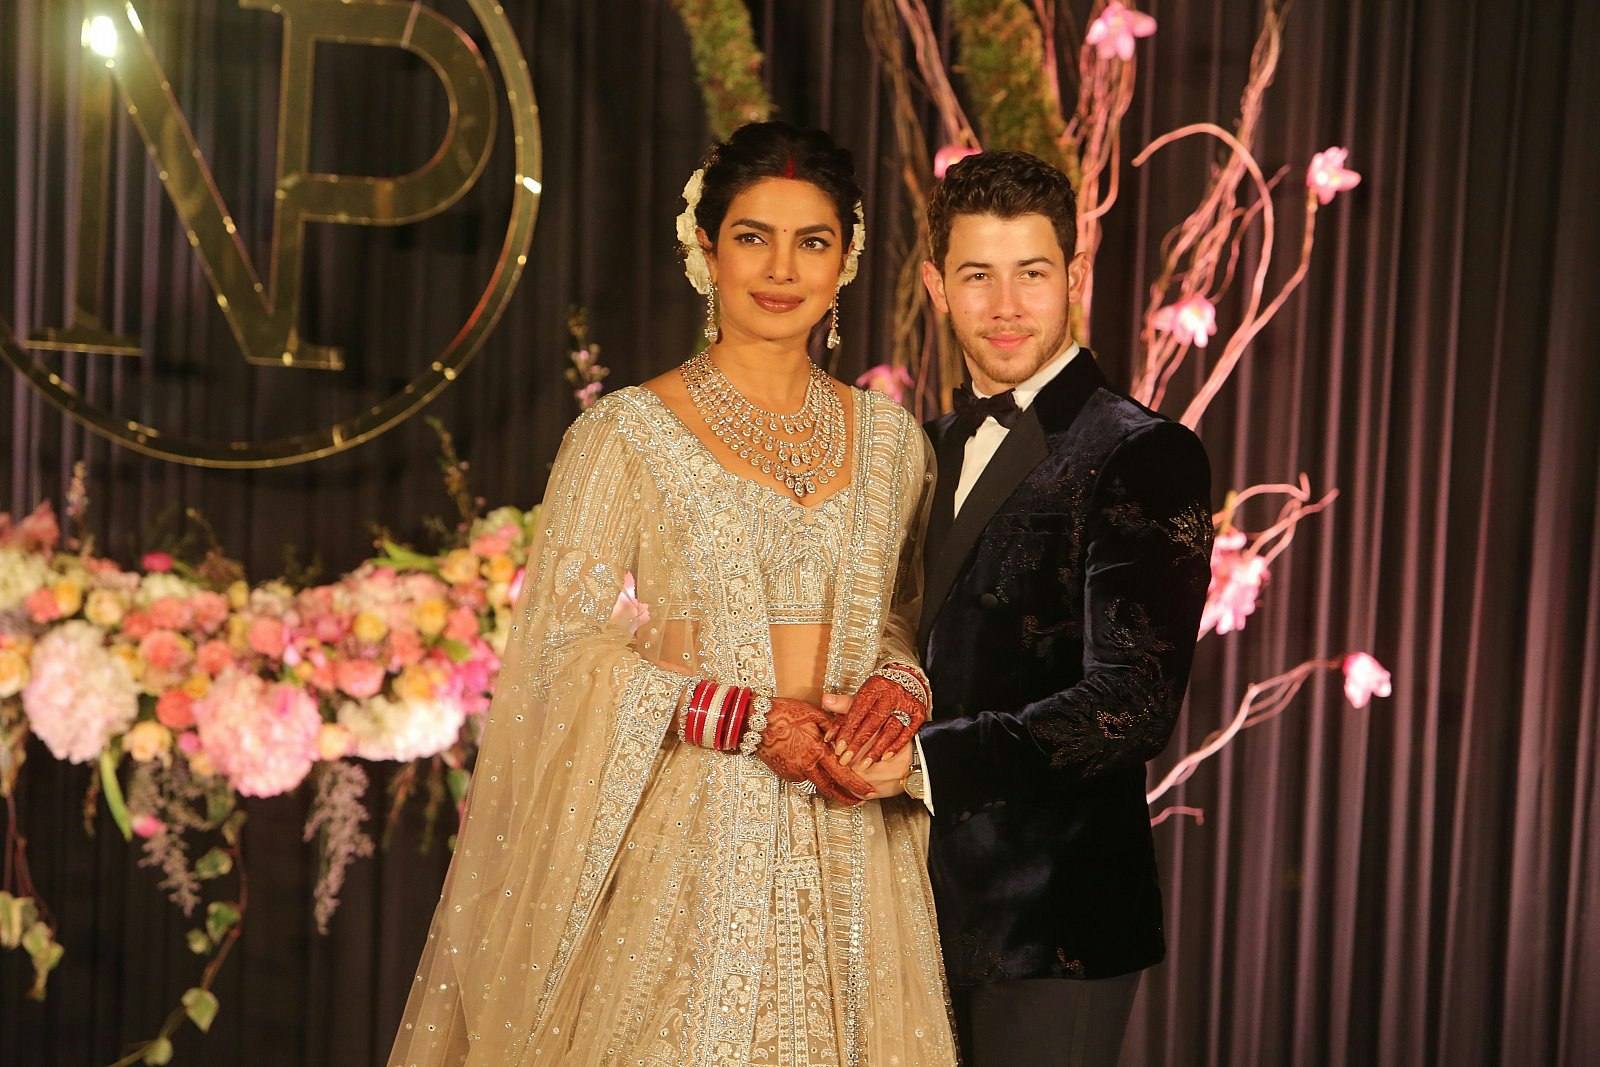 Priyanka Chopra and Nick Jonas at their wedding reception; she is wearing an elaborately beaded sari and necklace and he is wearing a dark velvet tuxedo. 